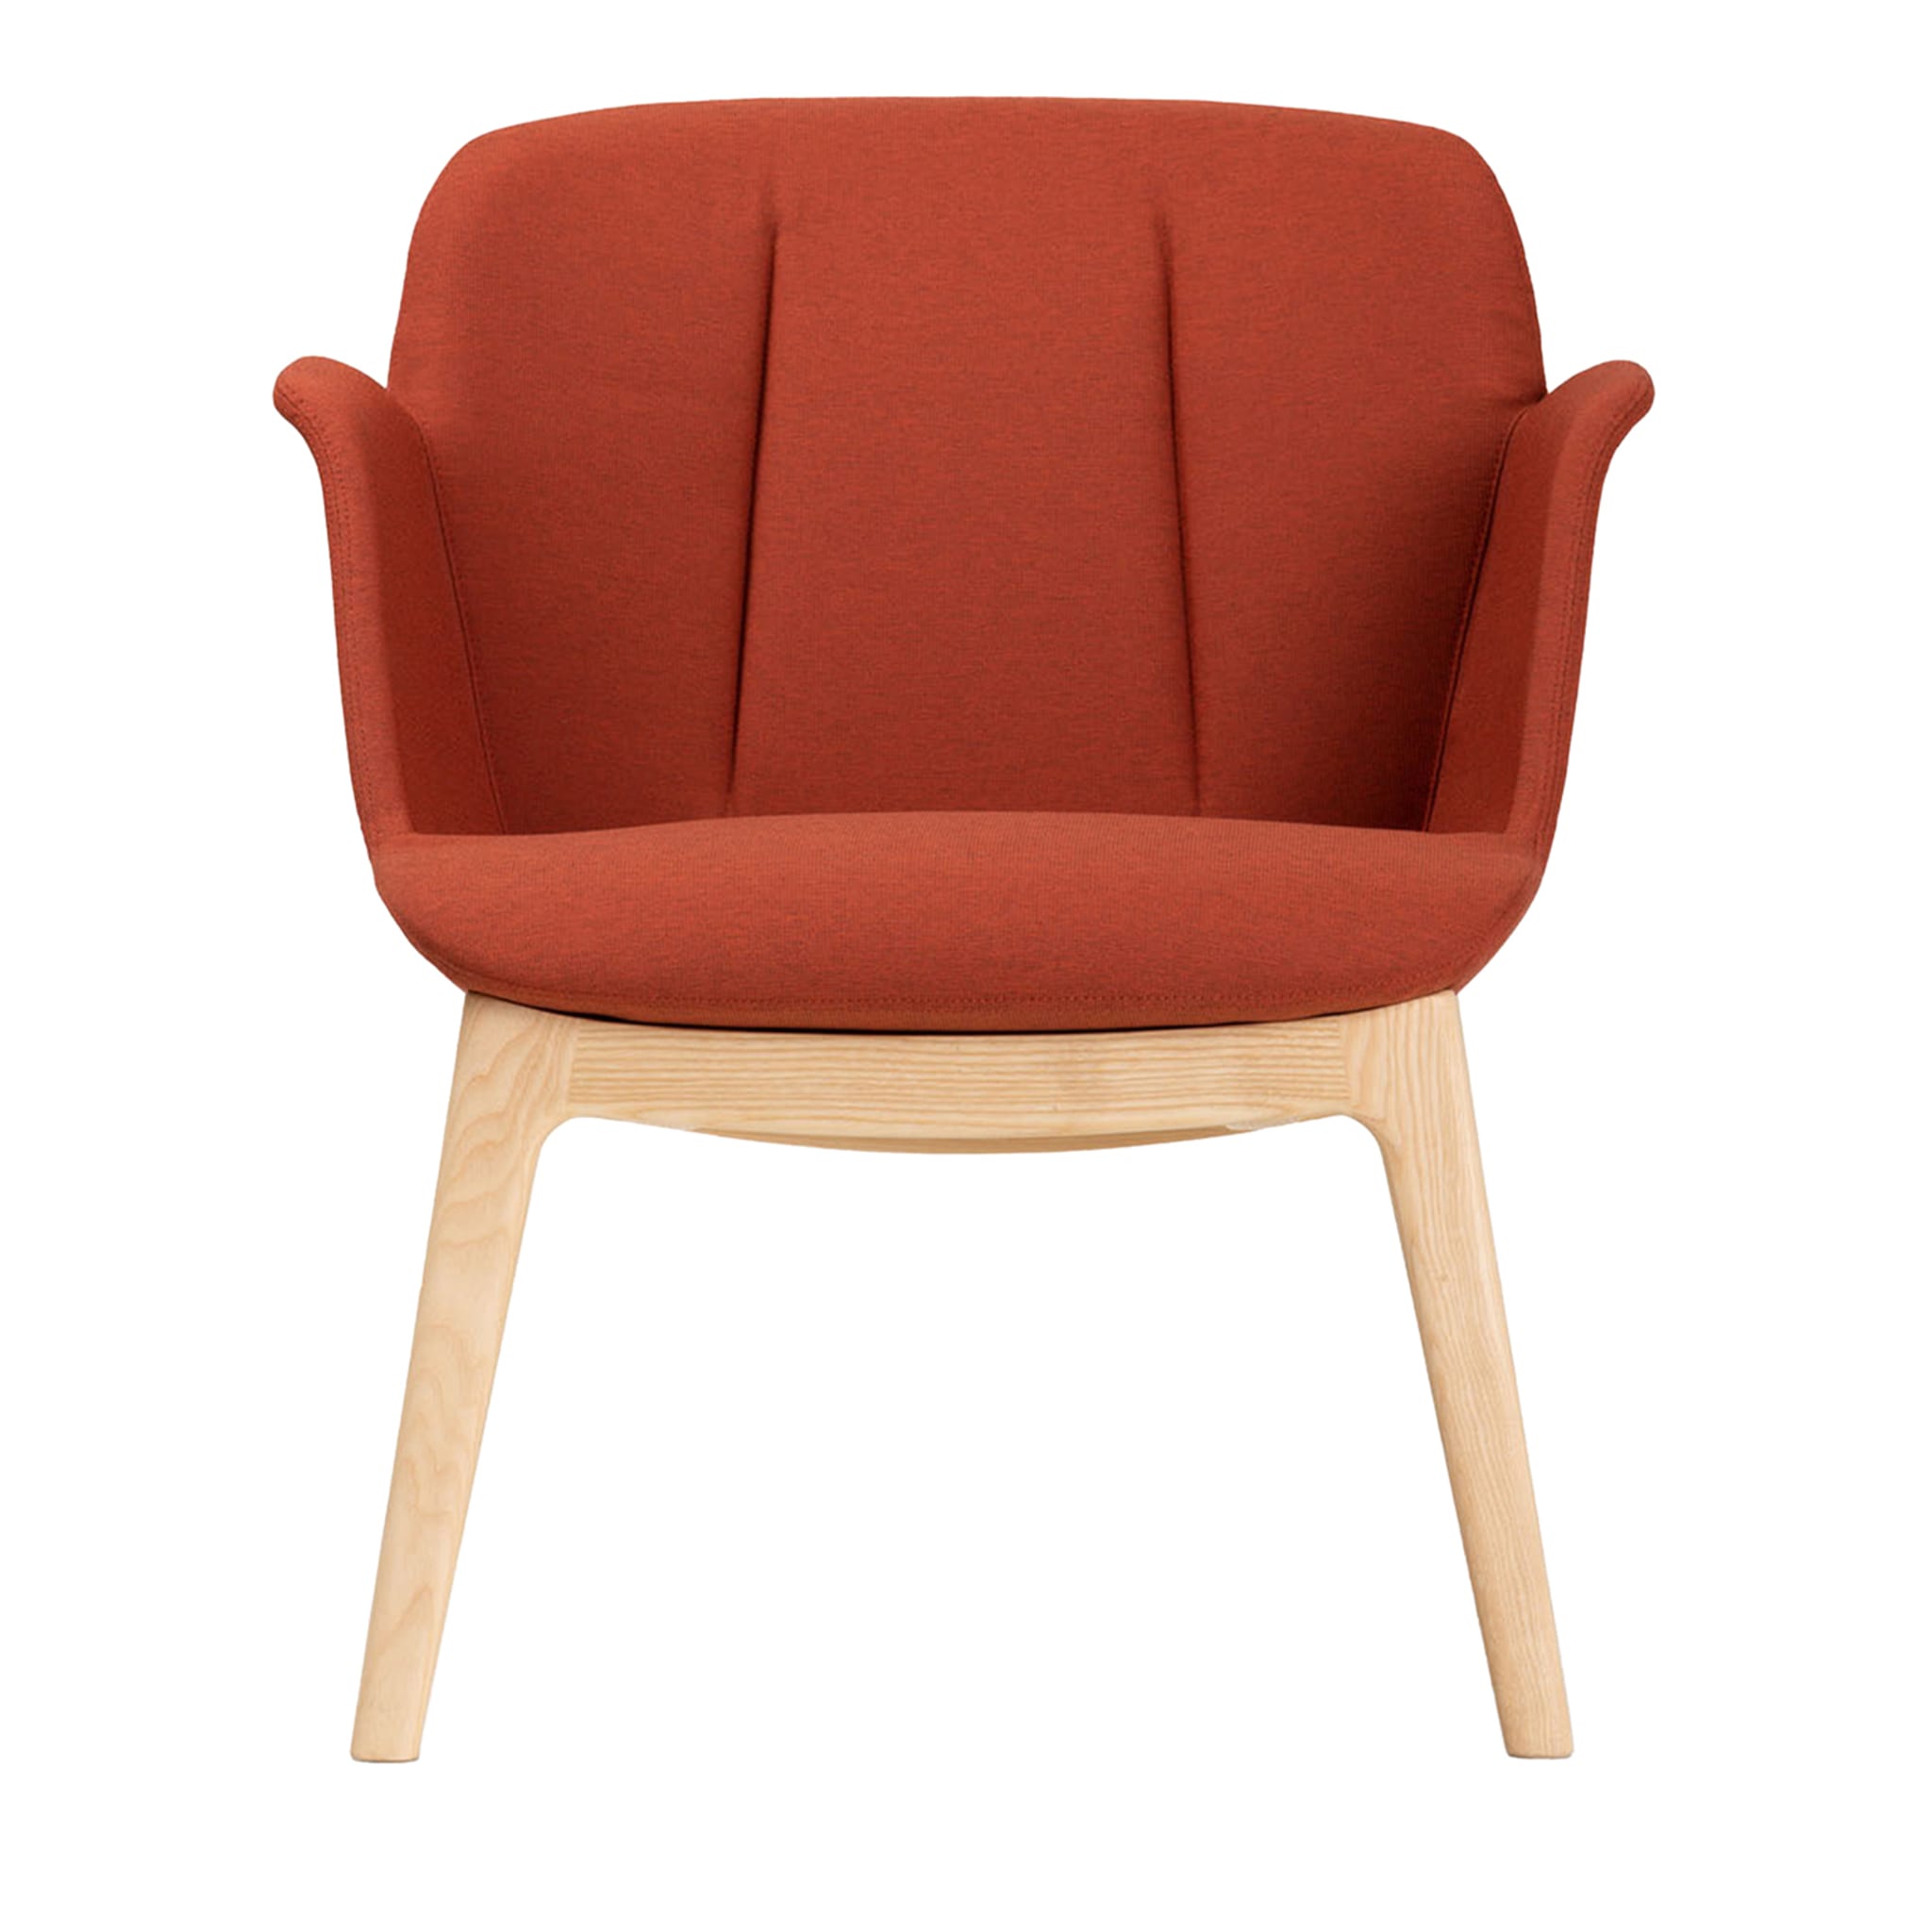 Hive Red Armchair by camira - Main view